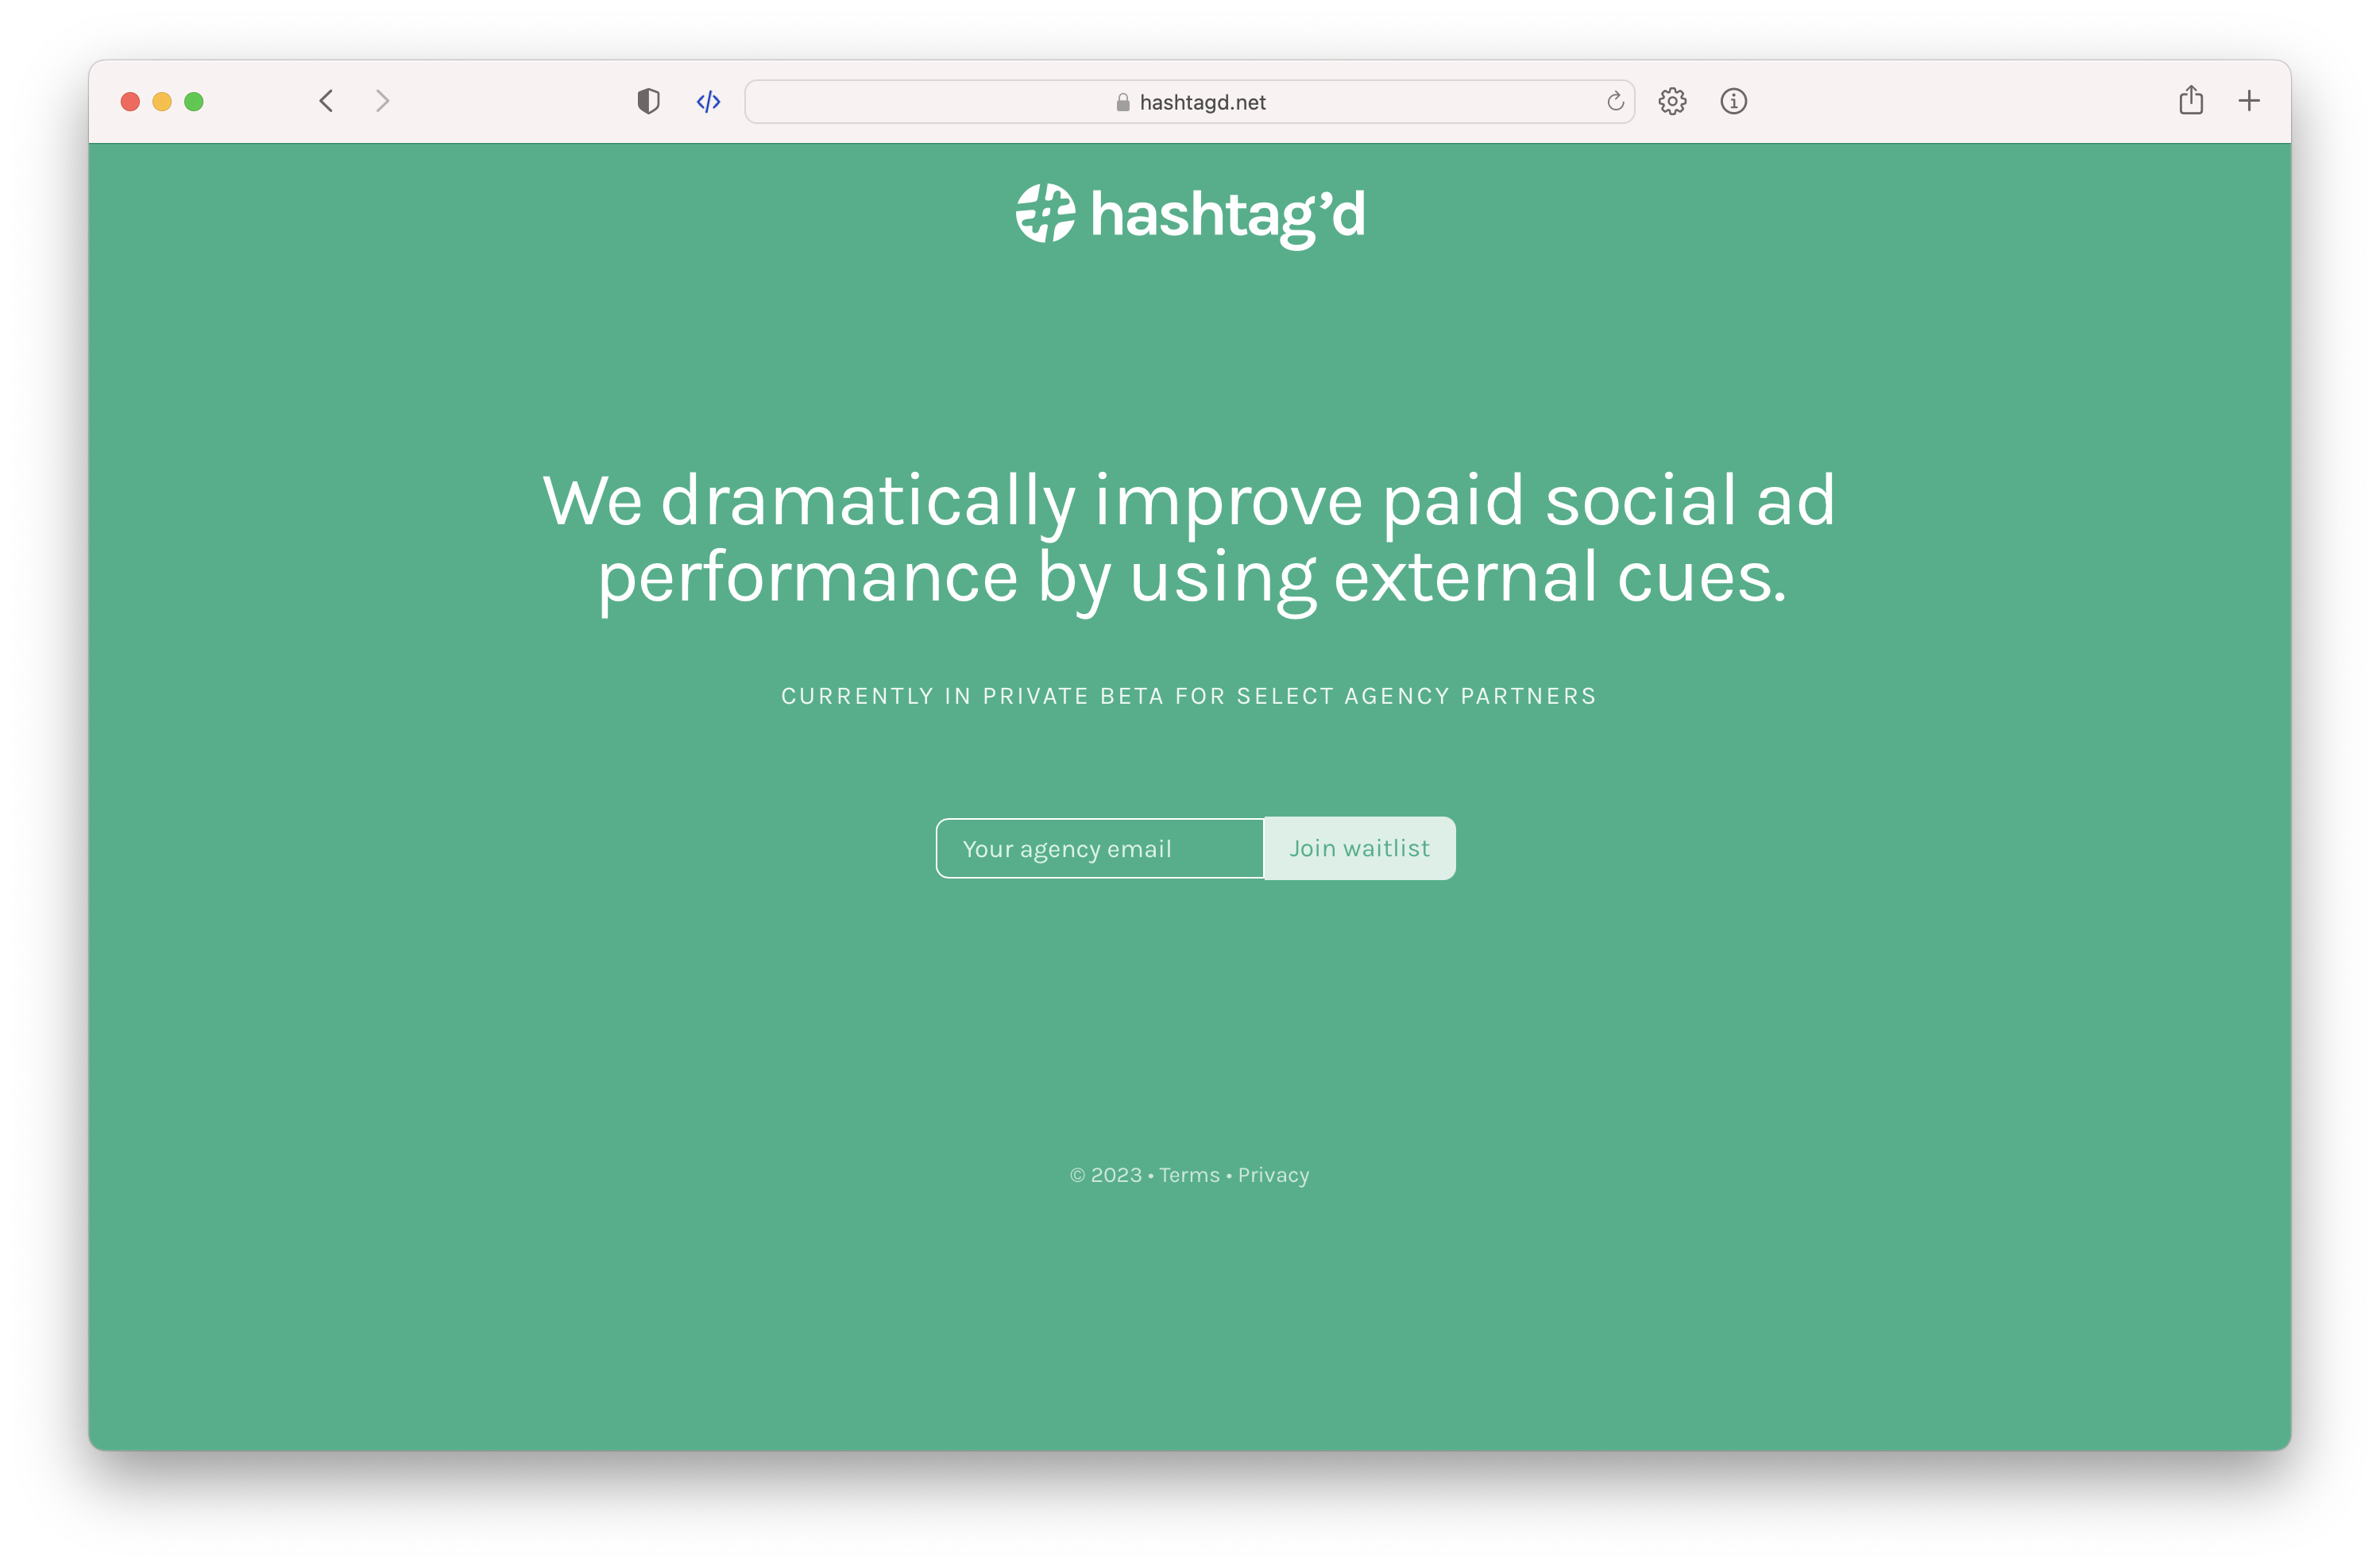 We dramatically improve paid social ad performance by using external cues.